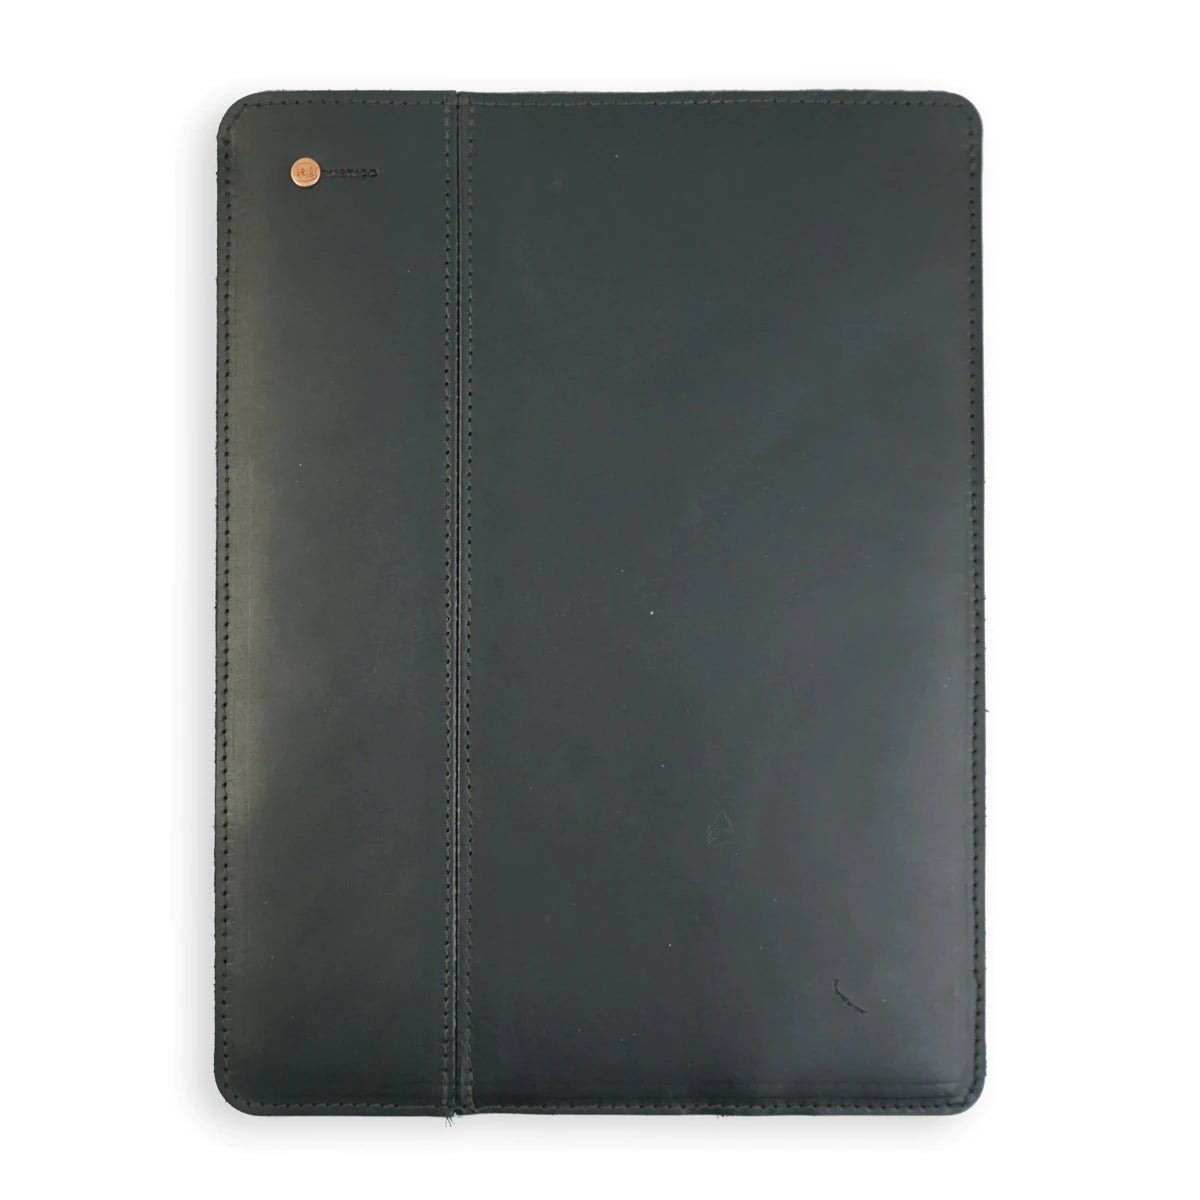 14" Leather Laptop Sleeve for MacBook Pro Size Black - Gaines Jewelers